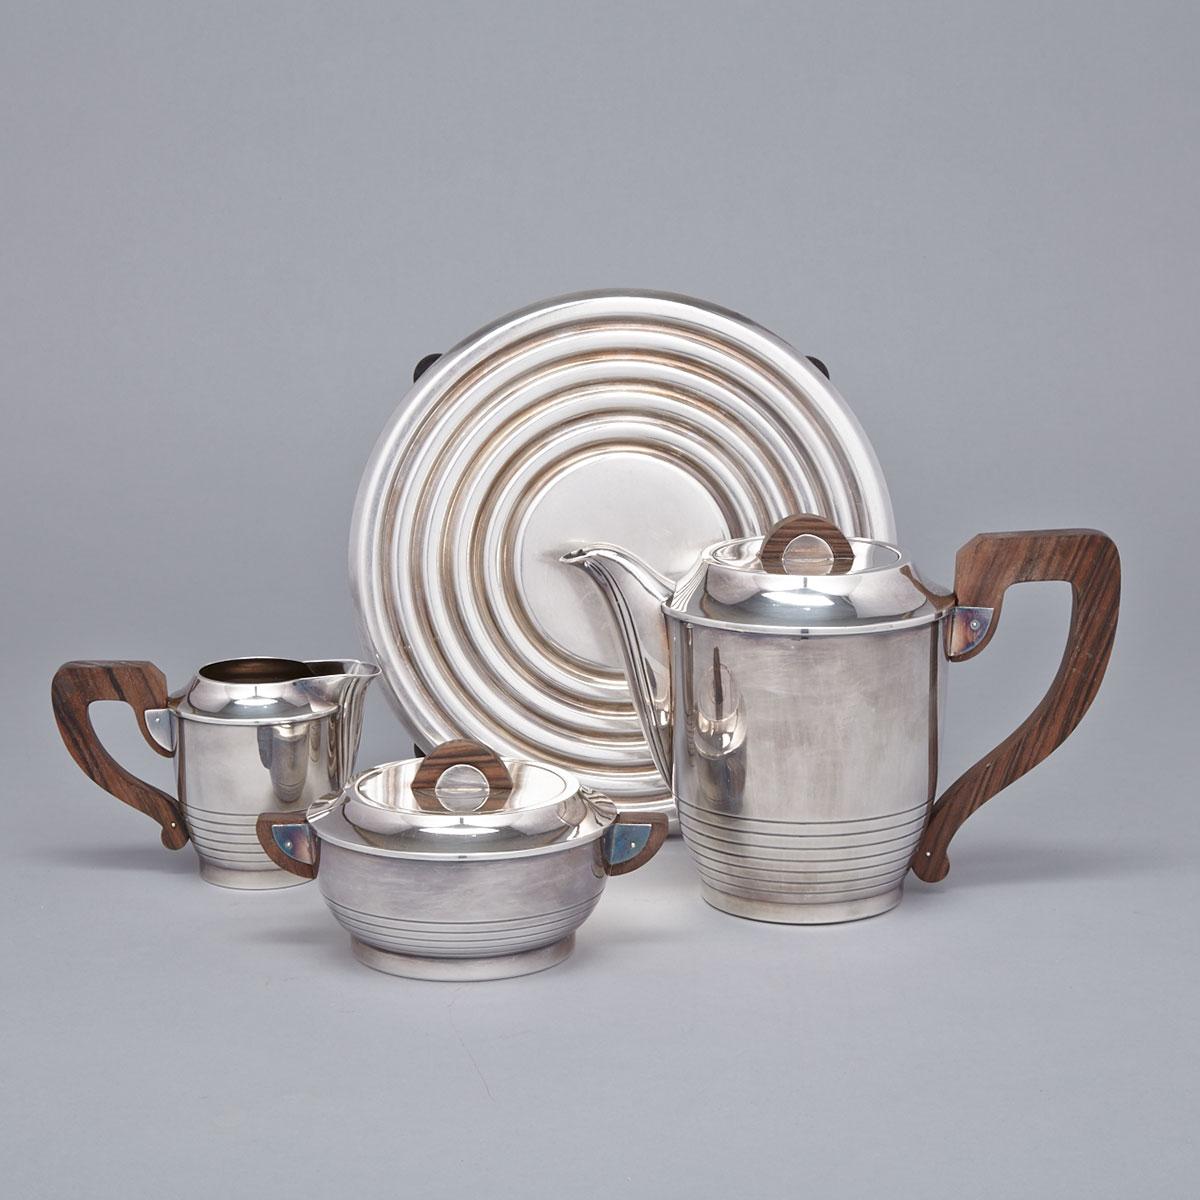 French Silver Plated Three-Piece Tea Service with Trivet, Saglier Frères and Christofle, 20th century